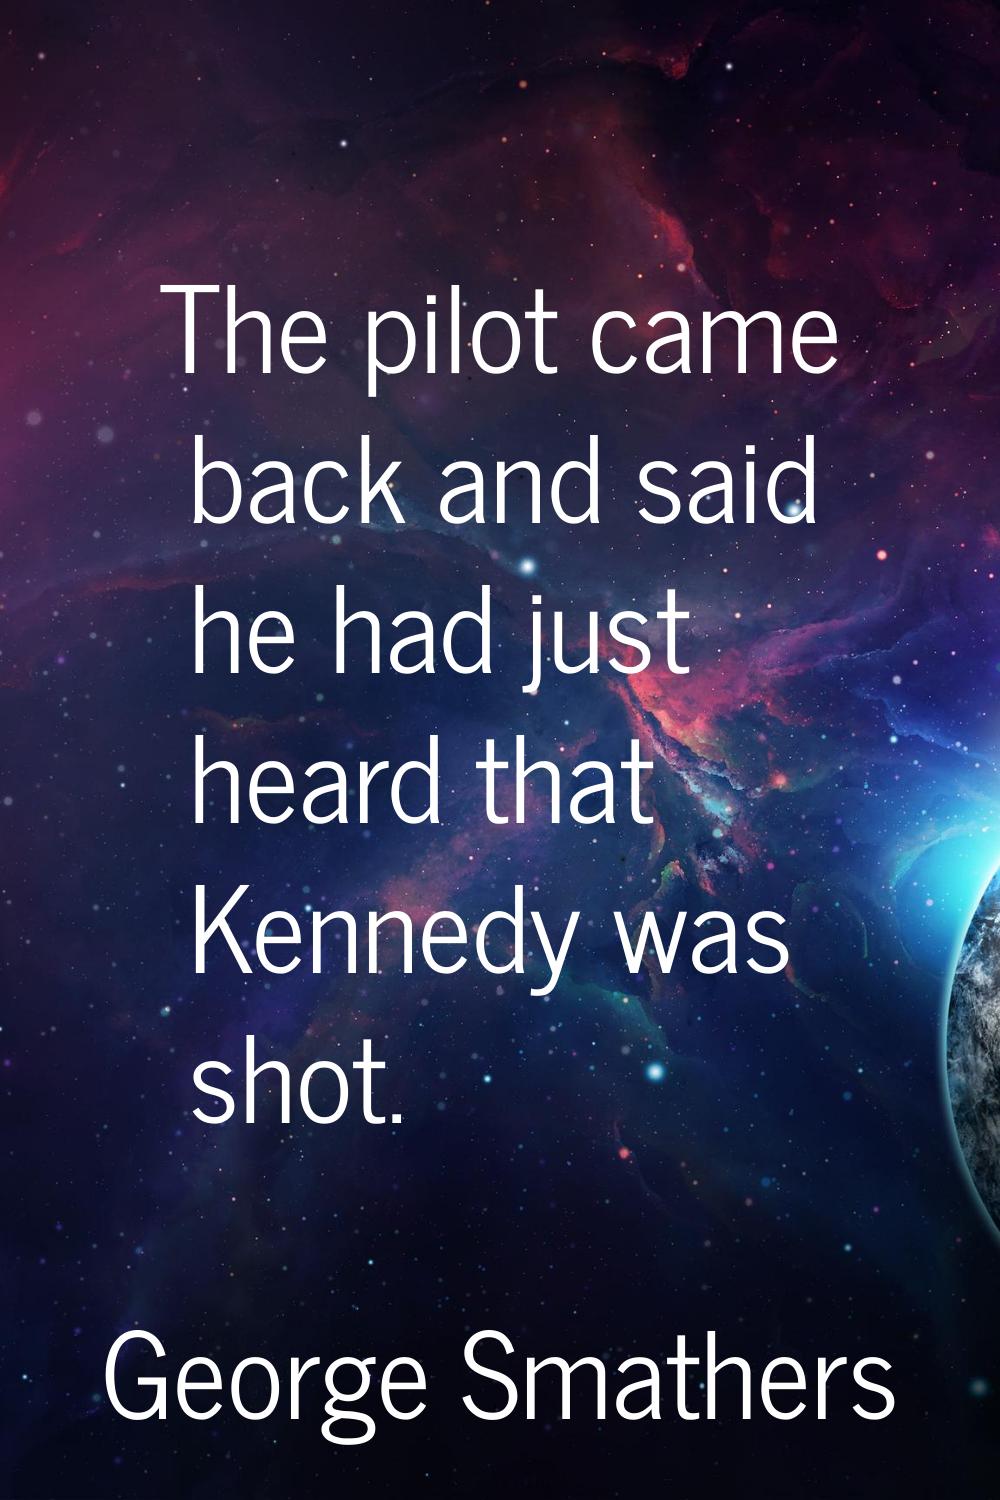 The pilot came back and said he had just heard that Kennedy was shot.